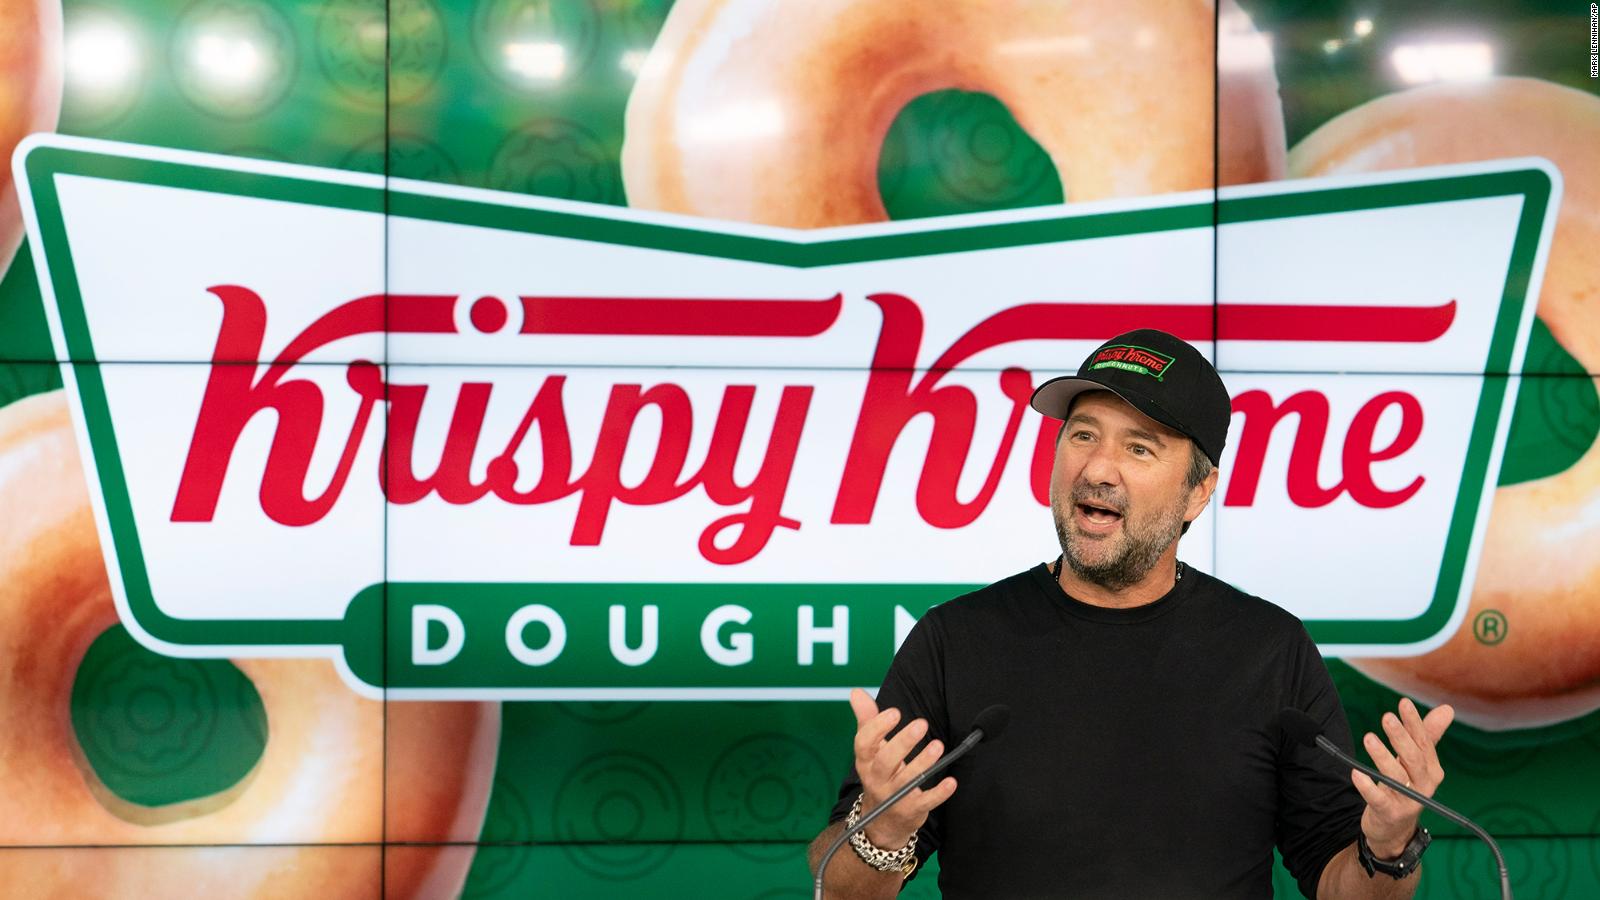 Krispy Kreme is off to a seriously rough start as it goes